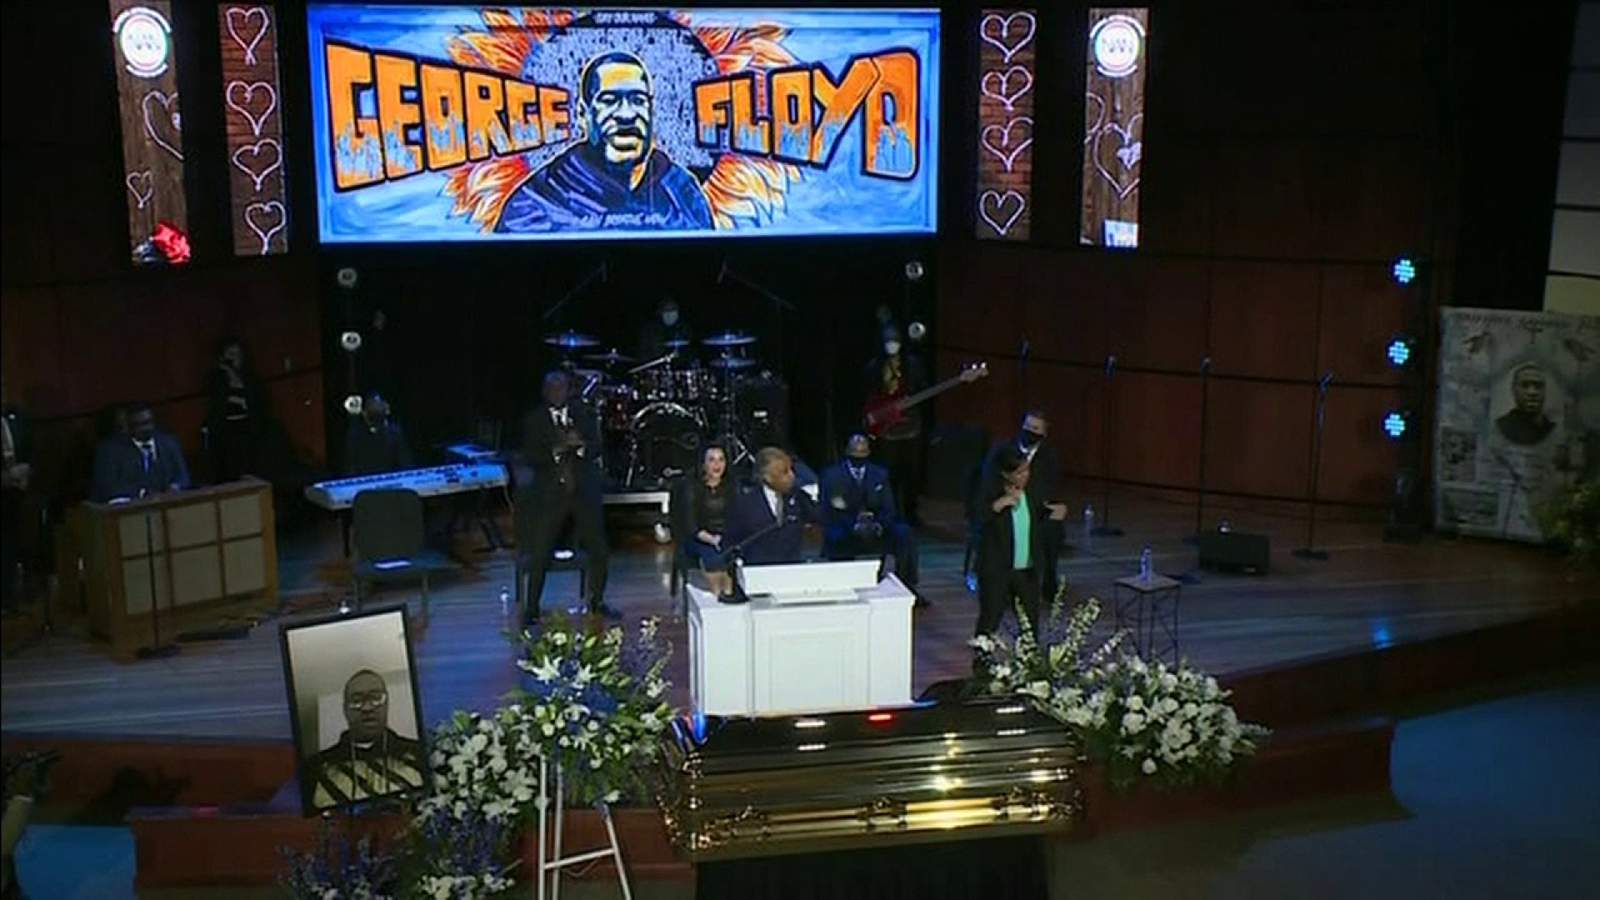 ‘Get your knee off our necks!’: George Floyd mourned in Minneapolis